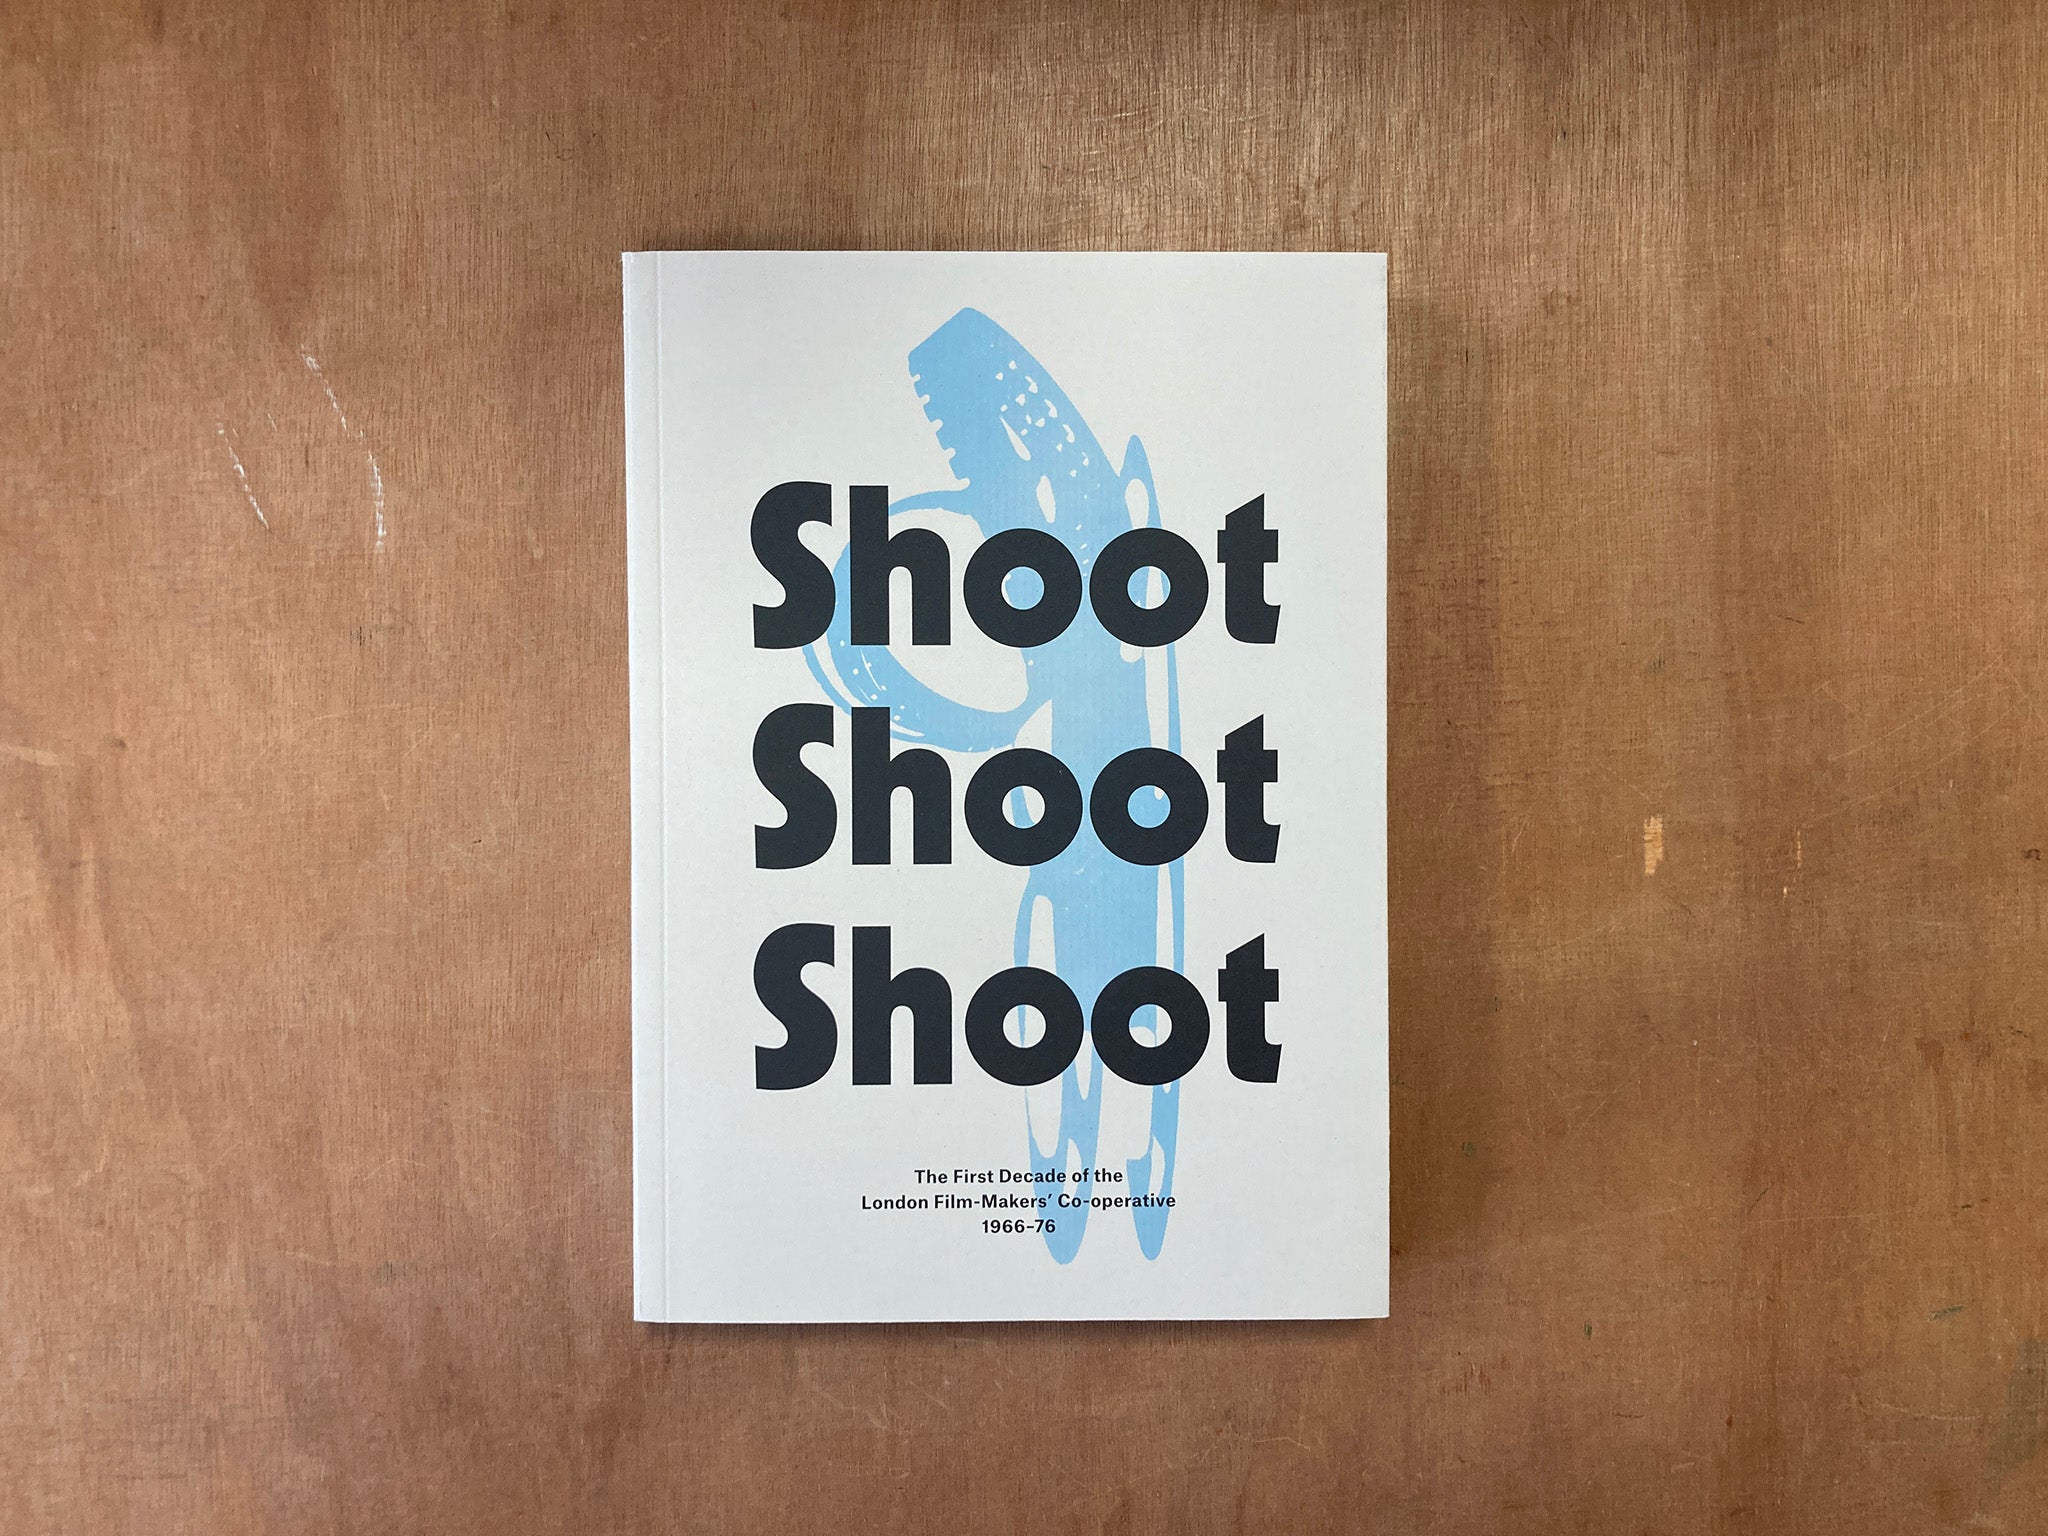 SHOOT SHOOT SHOOT: THE FIRST DECADE OF THE LONDON FILM-MAKERS’ CO-OPERATIVE 1966-76